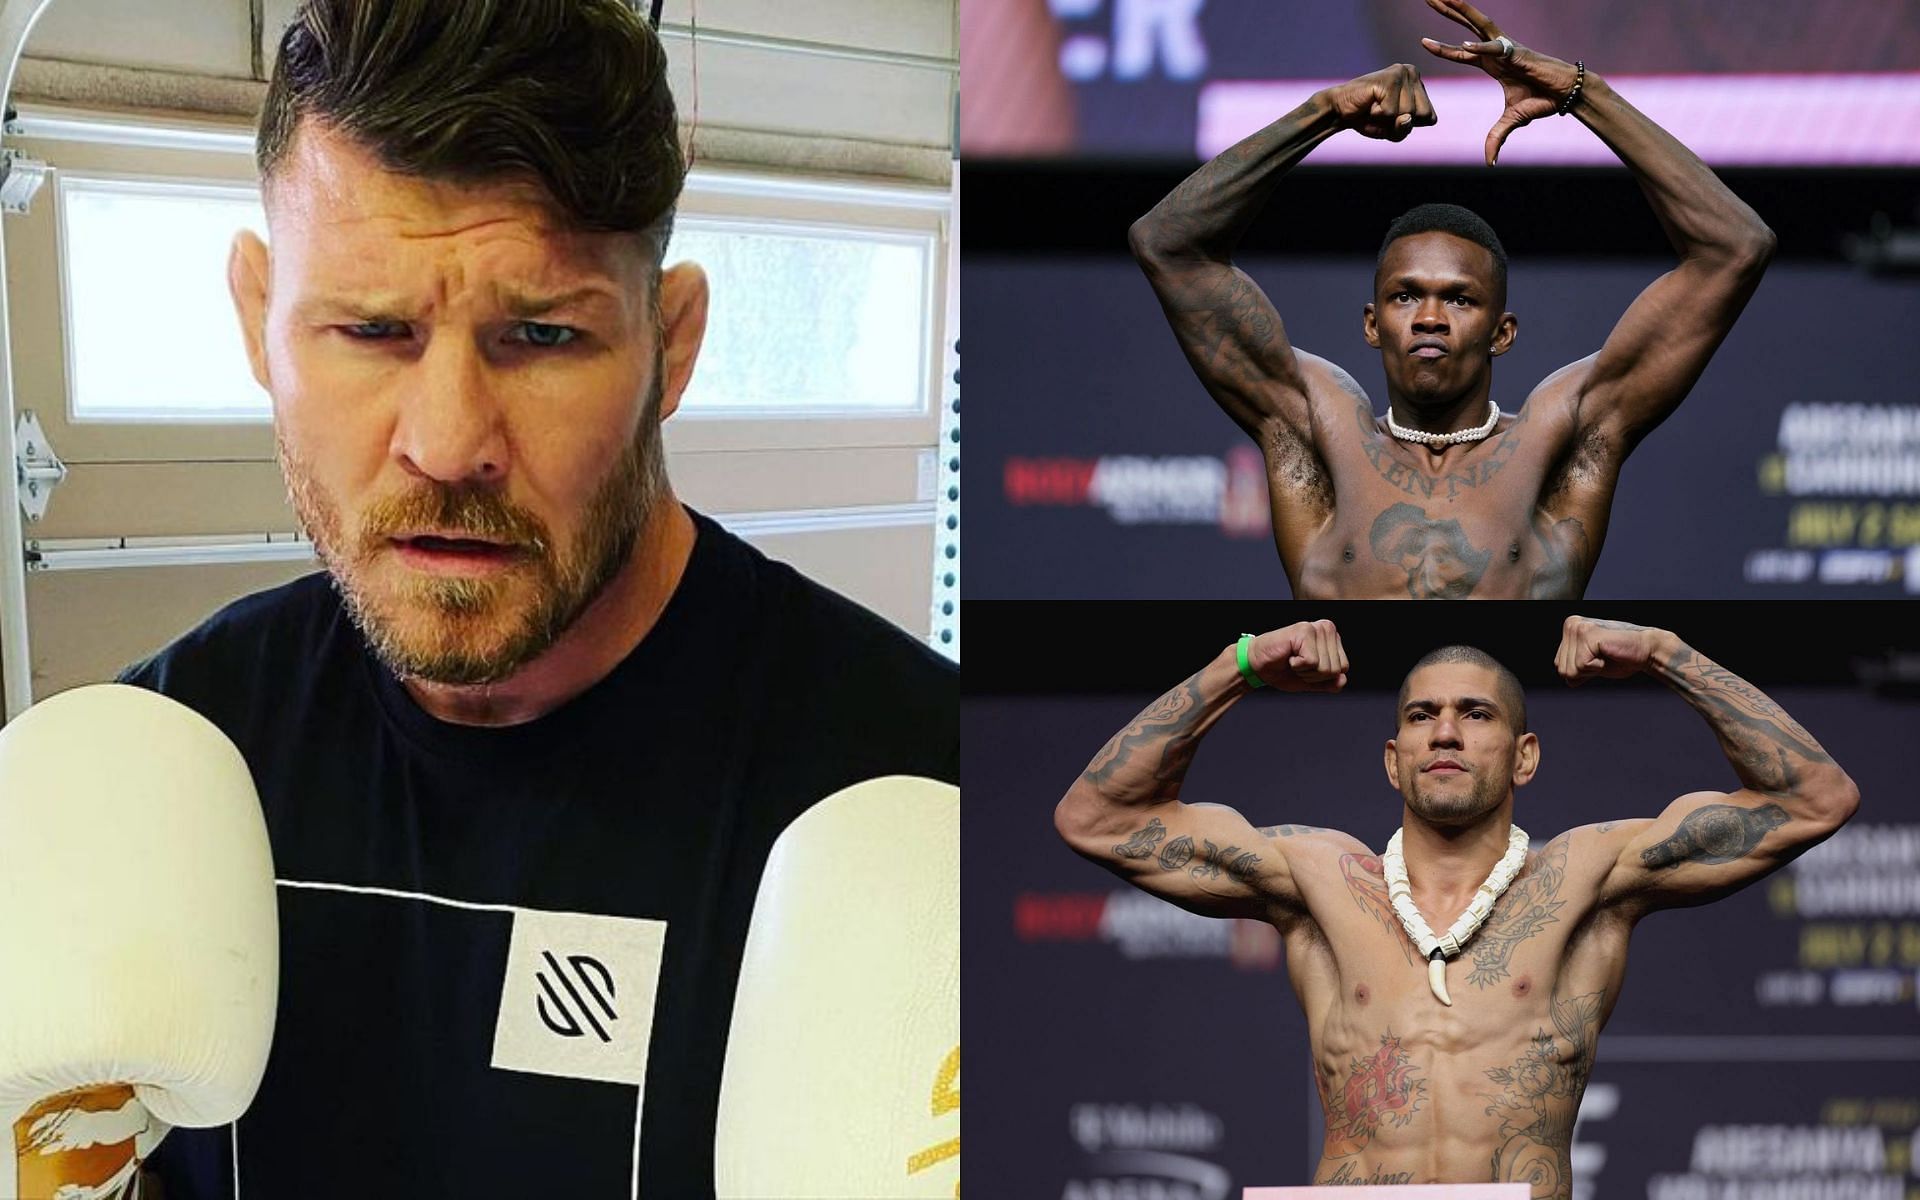 Michael Bisping (left), Israel Adesanya (top right), and Alex Pereira (bottom right) [Images courtesy of @mikebisping Instagram and Getty]